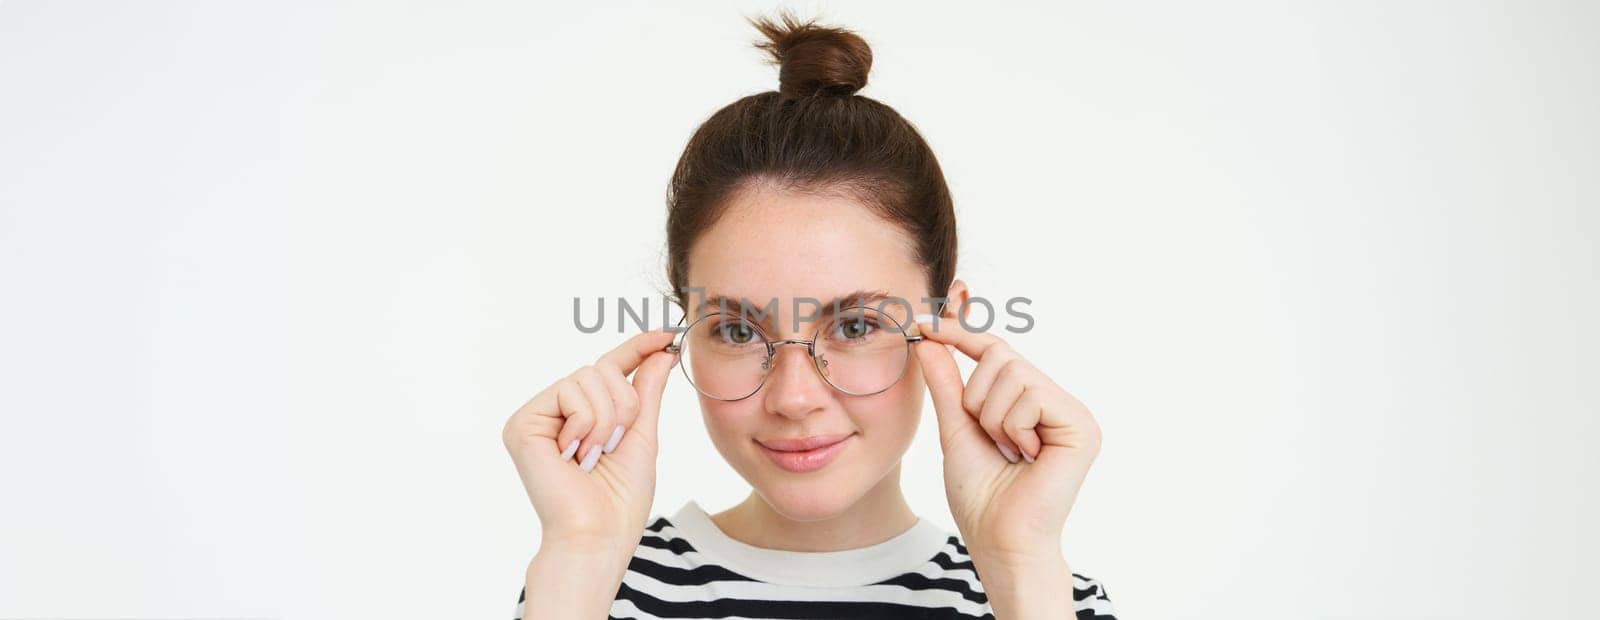 Close up portrait of smiling, attractive young woman wearing new eyewear, trying on glasses for vision, standing over white background.